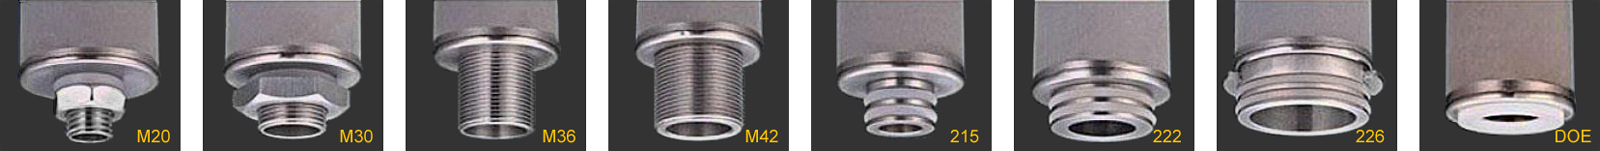 We supply the porous metal filter with different kind of connectors